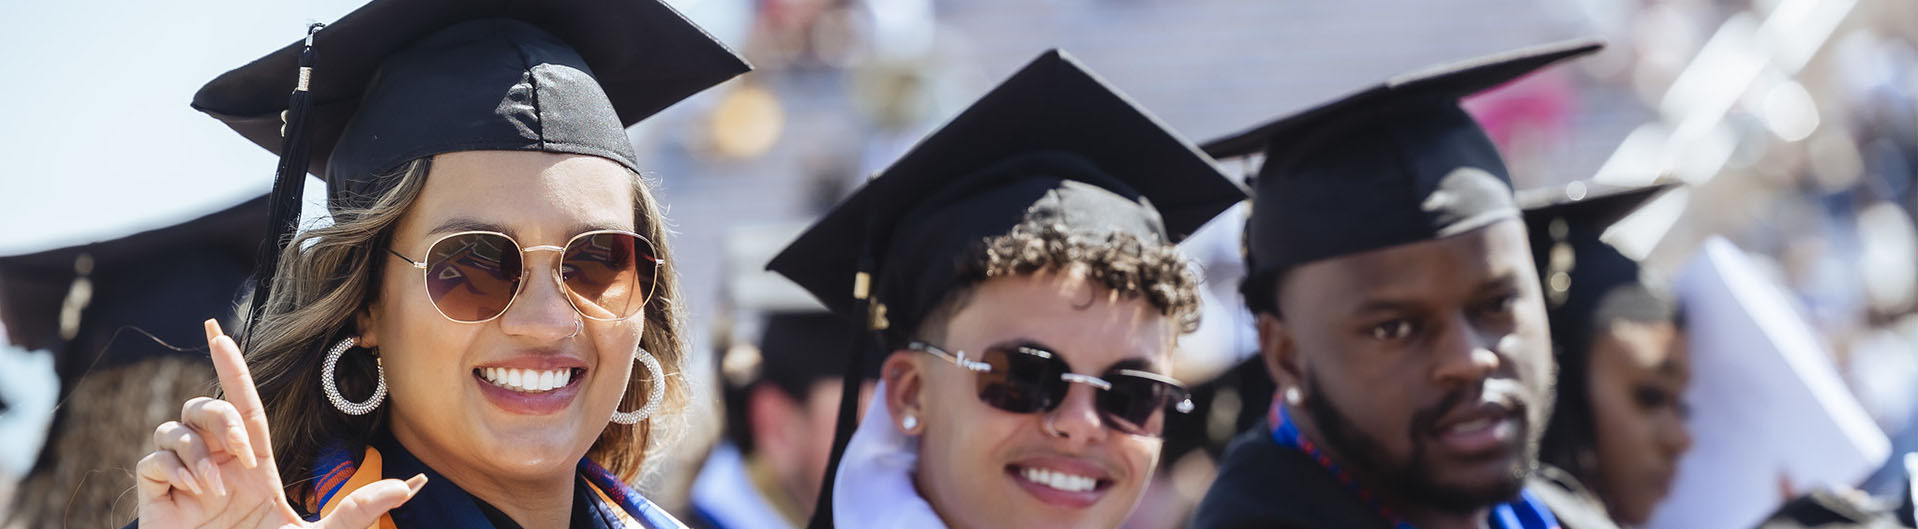 Image of students in regalia smiling at commencement